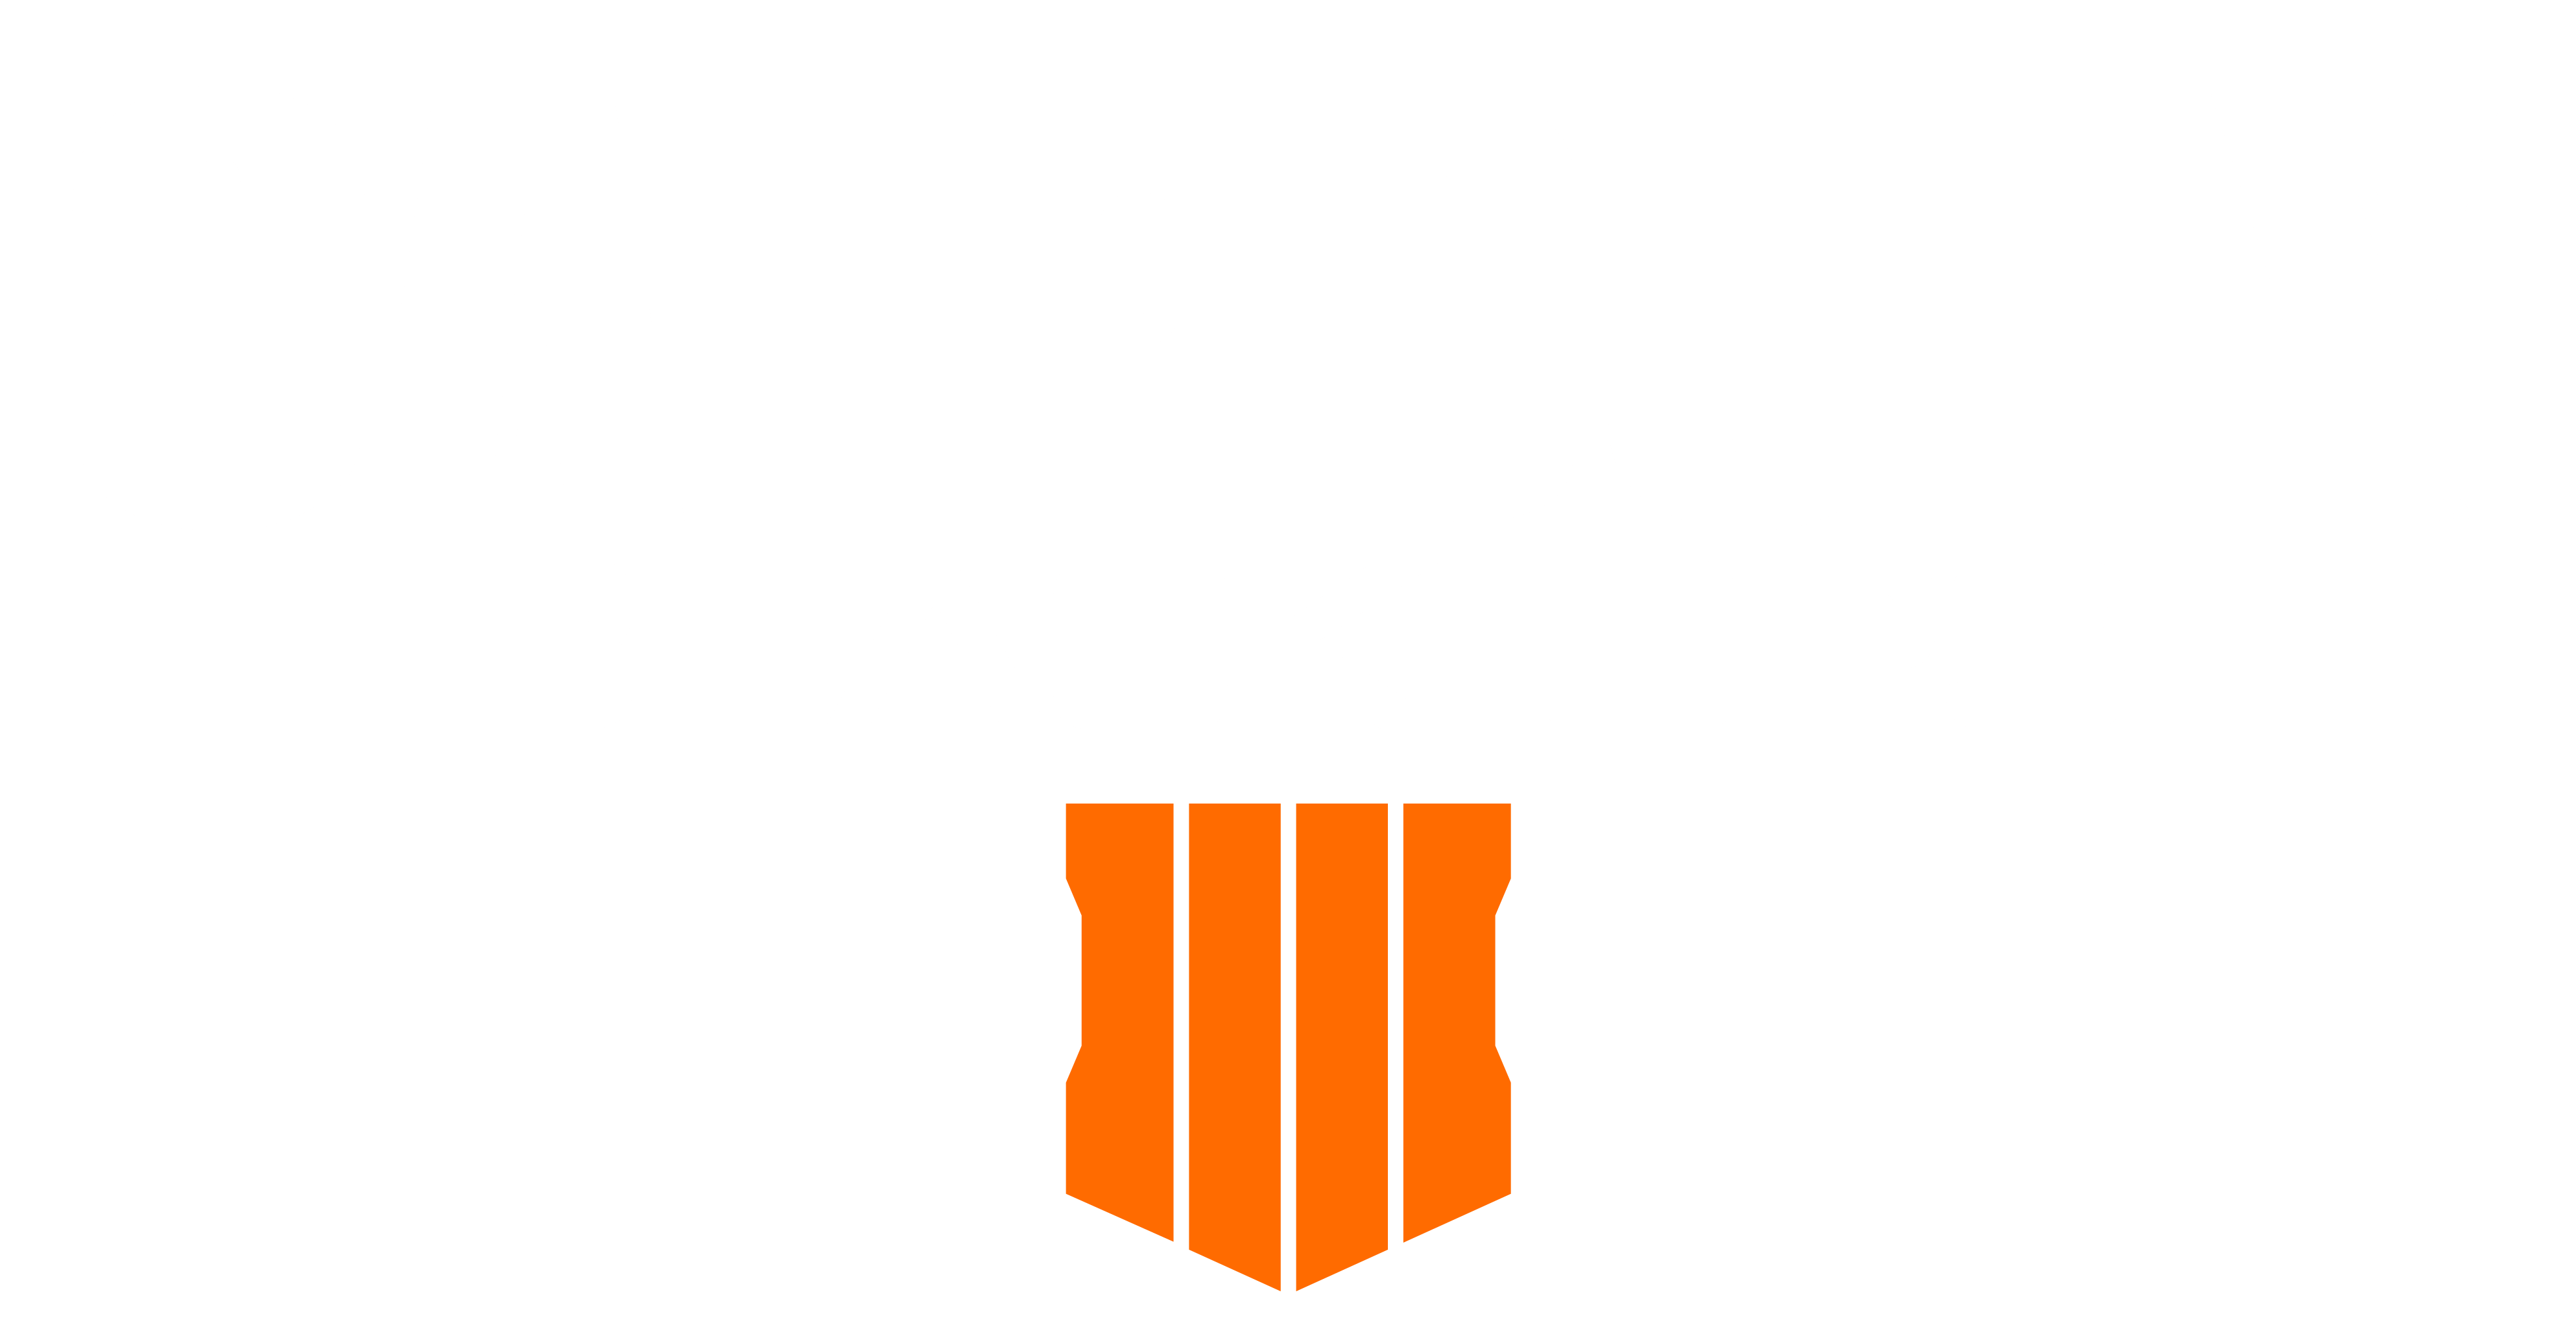 Black Ops 4 Logo - Call of Duty®: Black Ops 4 Game | PS4 - PlayStation